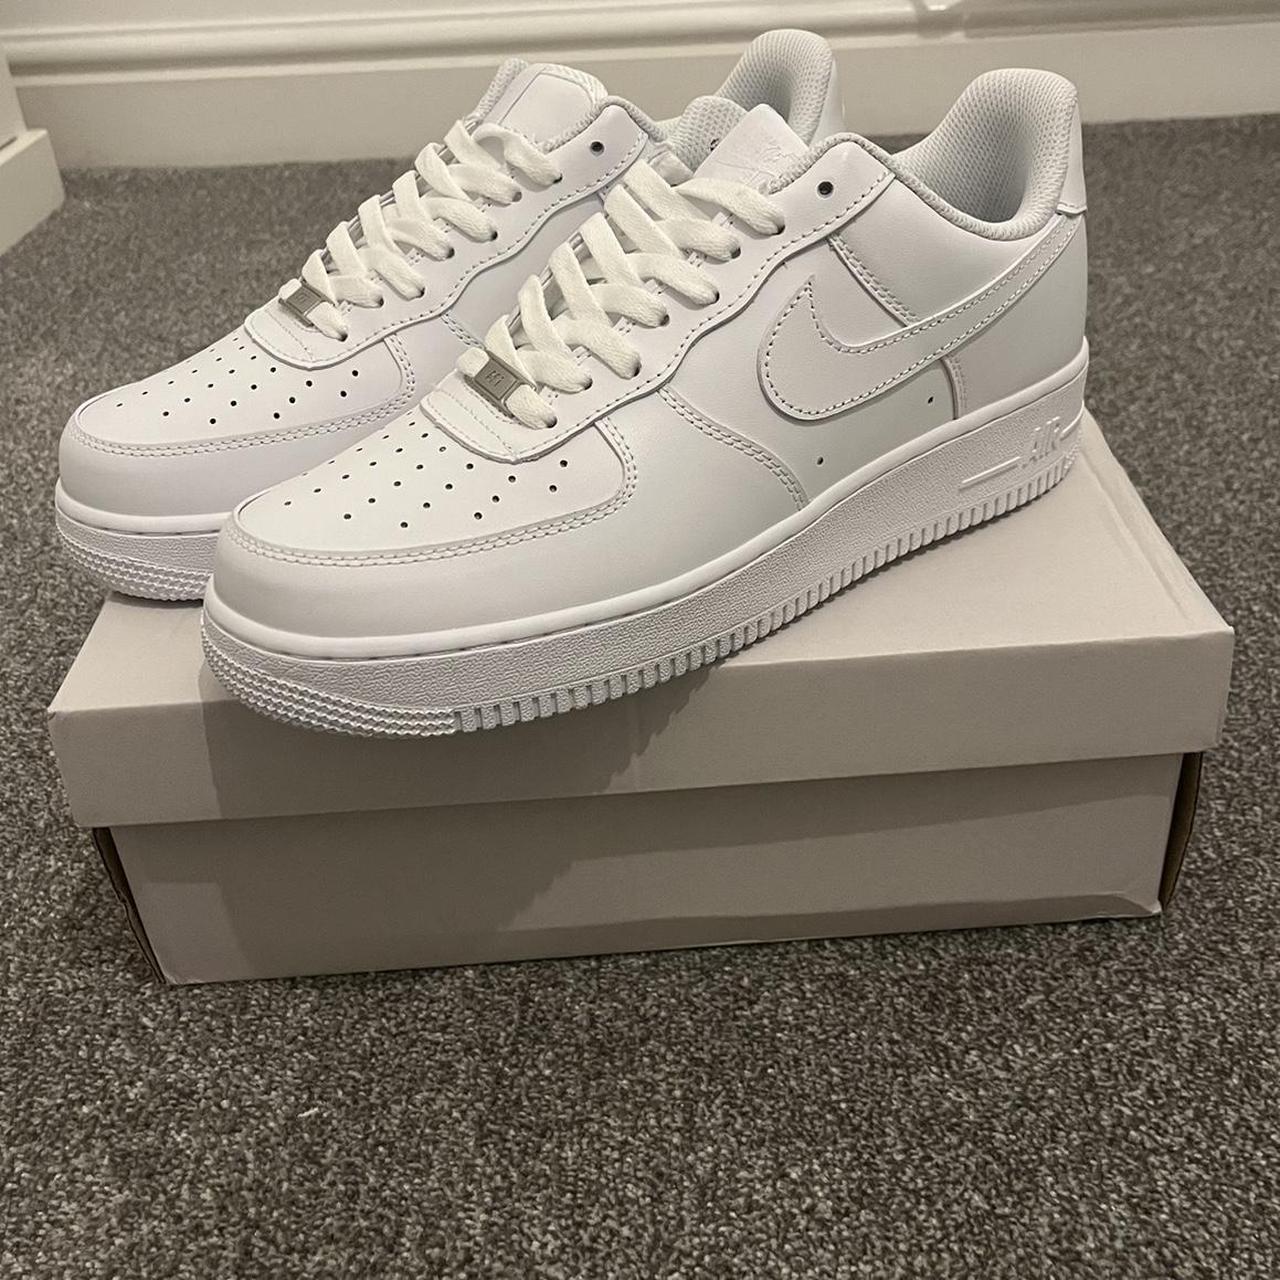 Nike Air Force 1 Low '07 Size UK 8.5 and 9.5 White... - Depop